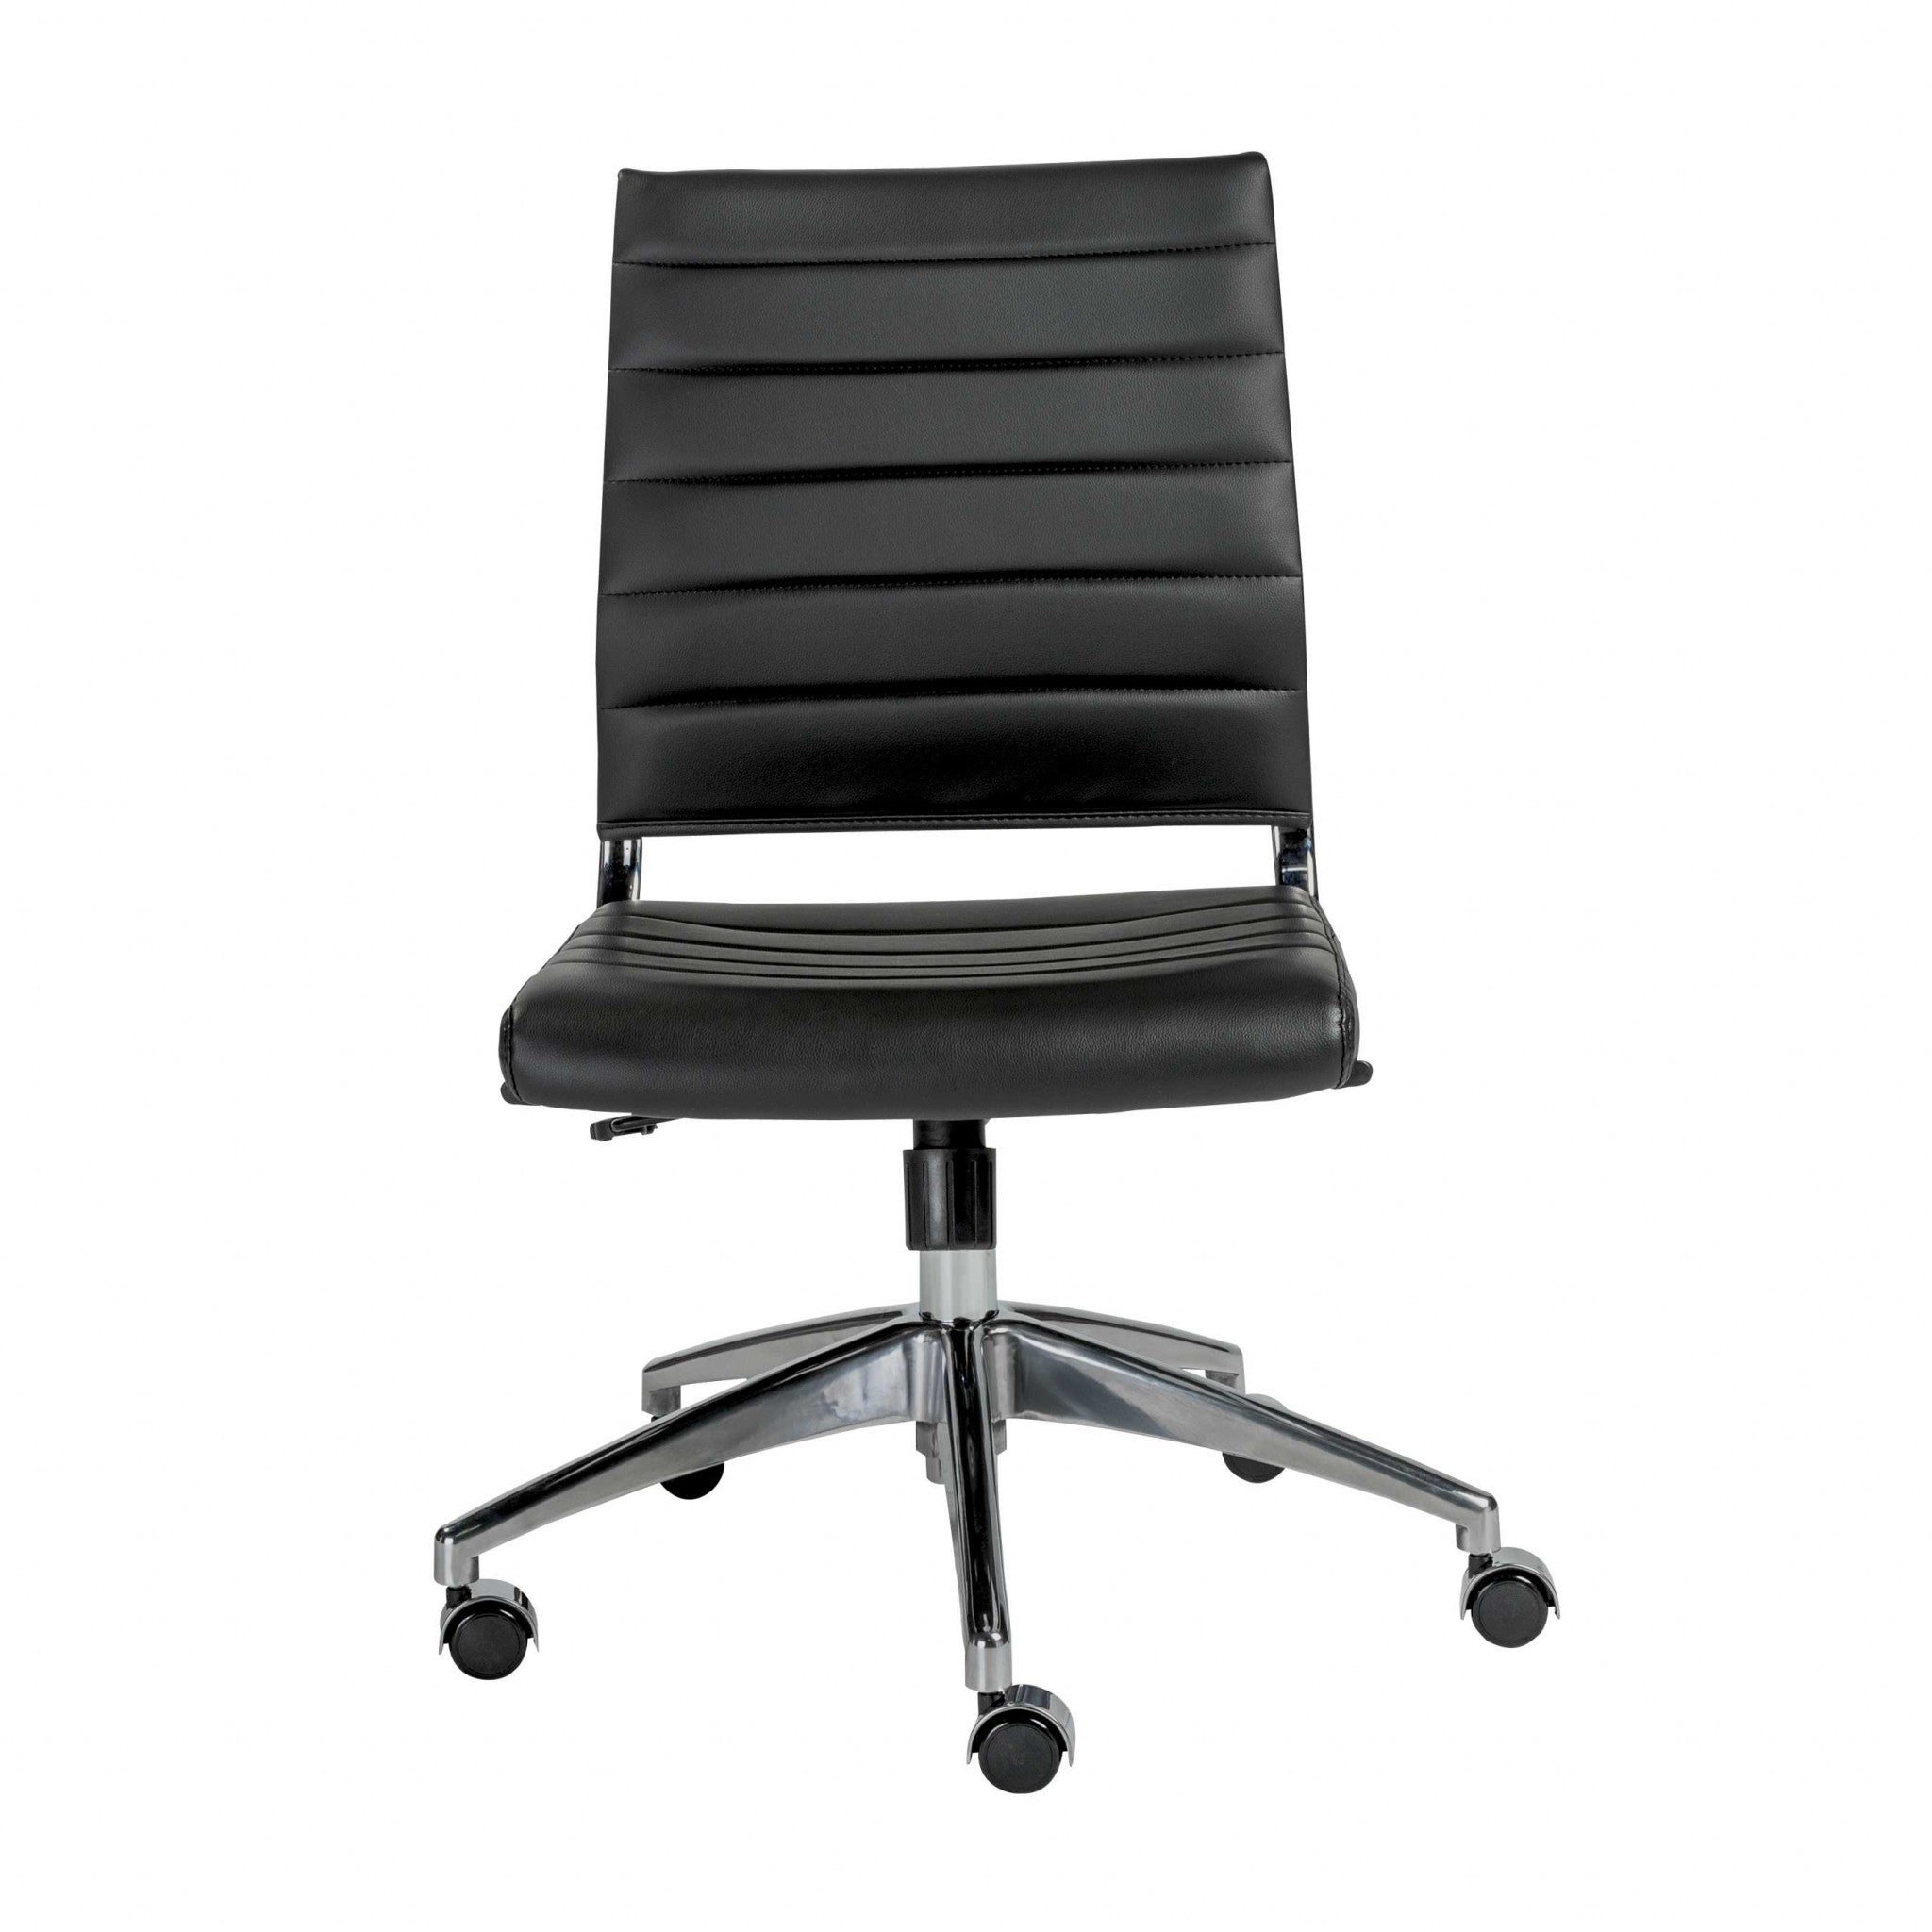 Black Faux Leather Seat Swivel Adjustable Task Chair Leather Back Steel Frame